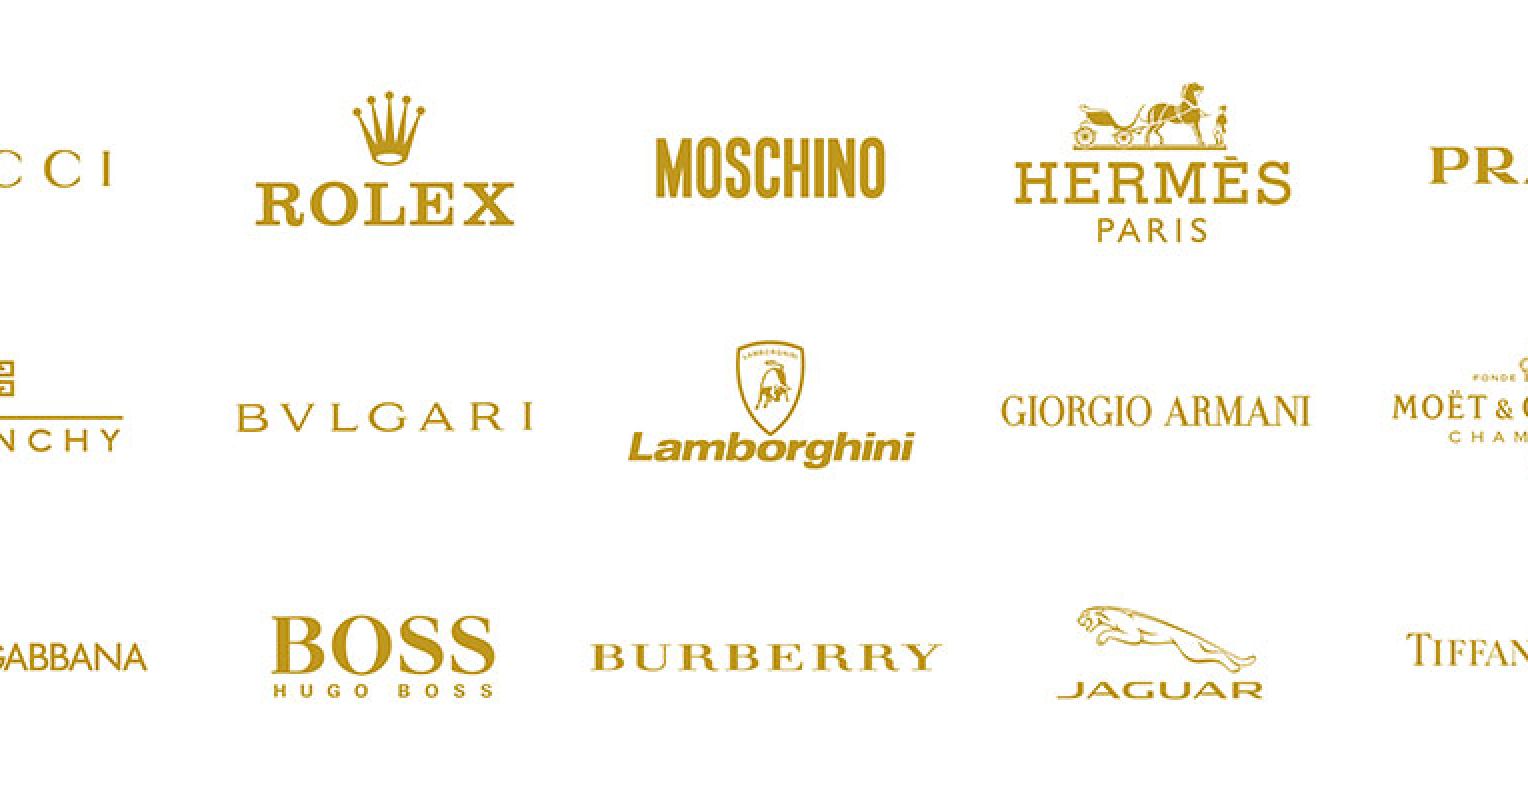 Are These REALLY Luxury Brands? *YES THEY ARE* 